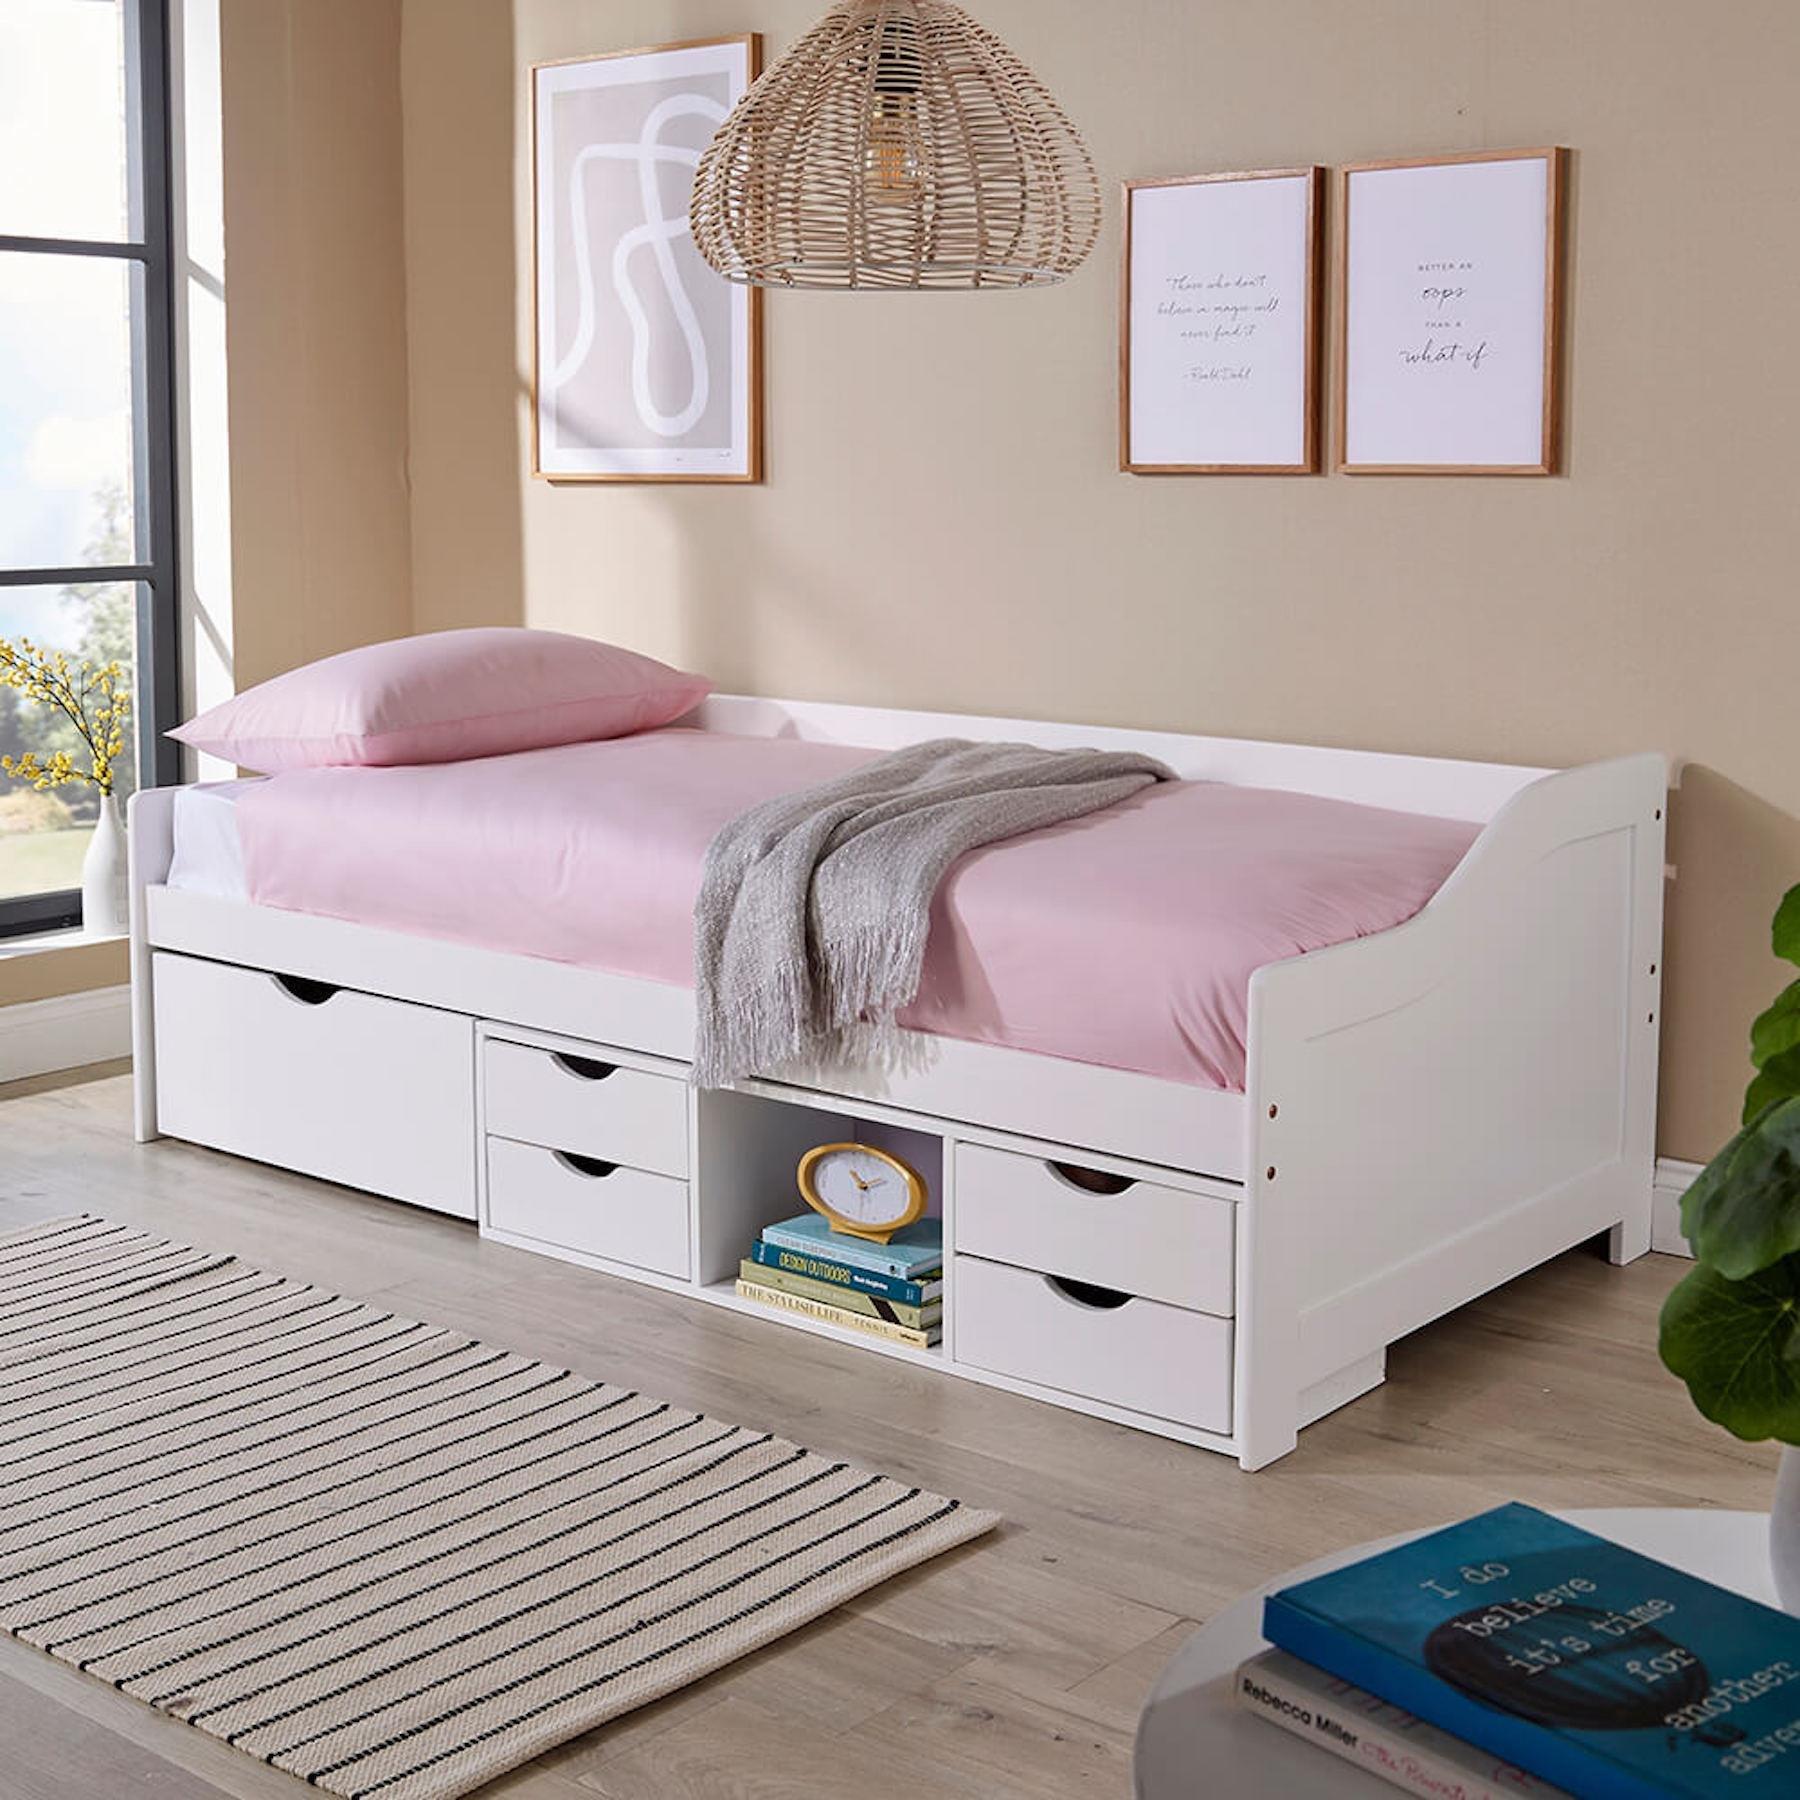 Kandiyohi Grey Solid Pine Cabin Bed 3Ft Single Guest Bed Under Bed Storage With 5 Drawers white